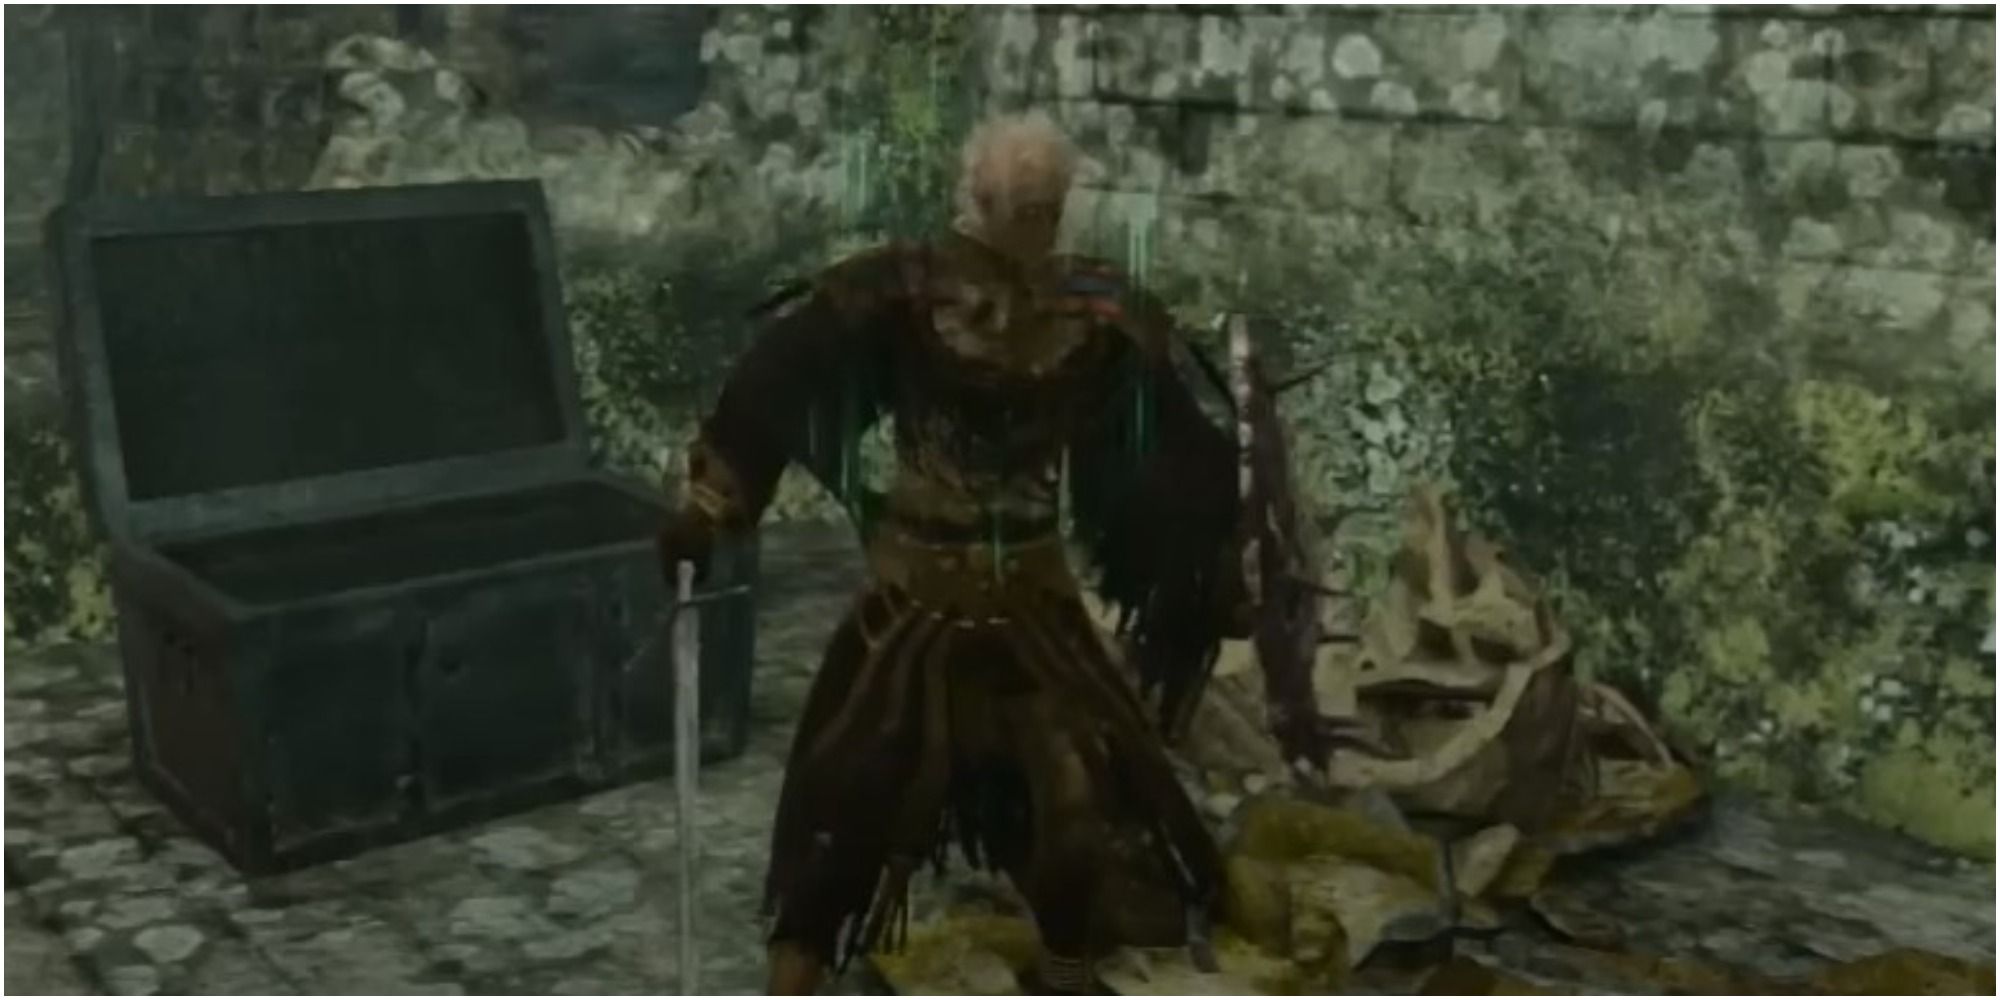 Dark Souls 2 Wearing The Lion Mage Armor Set After Finding It In A Chest